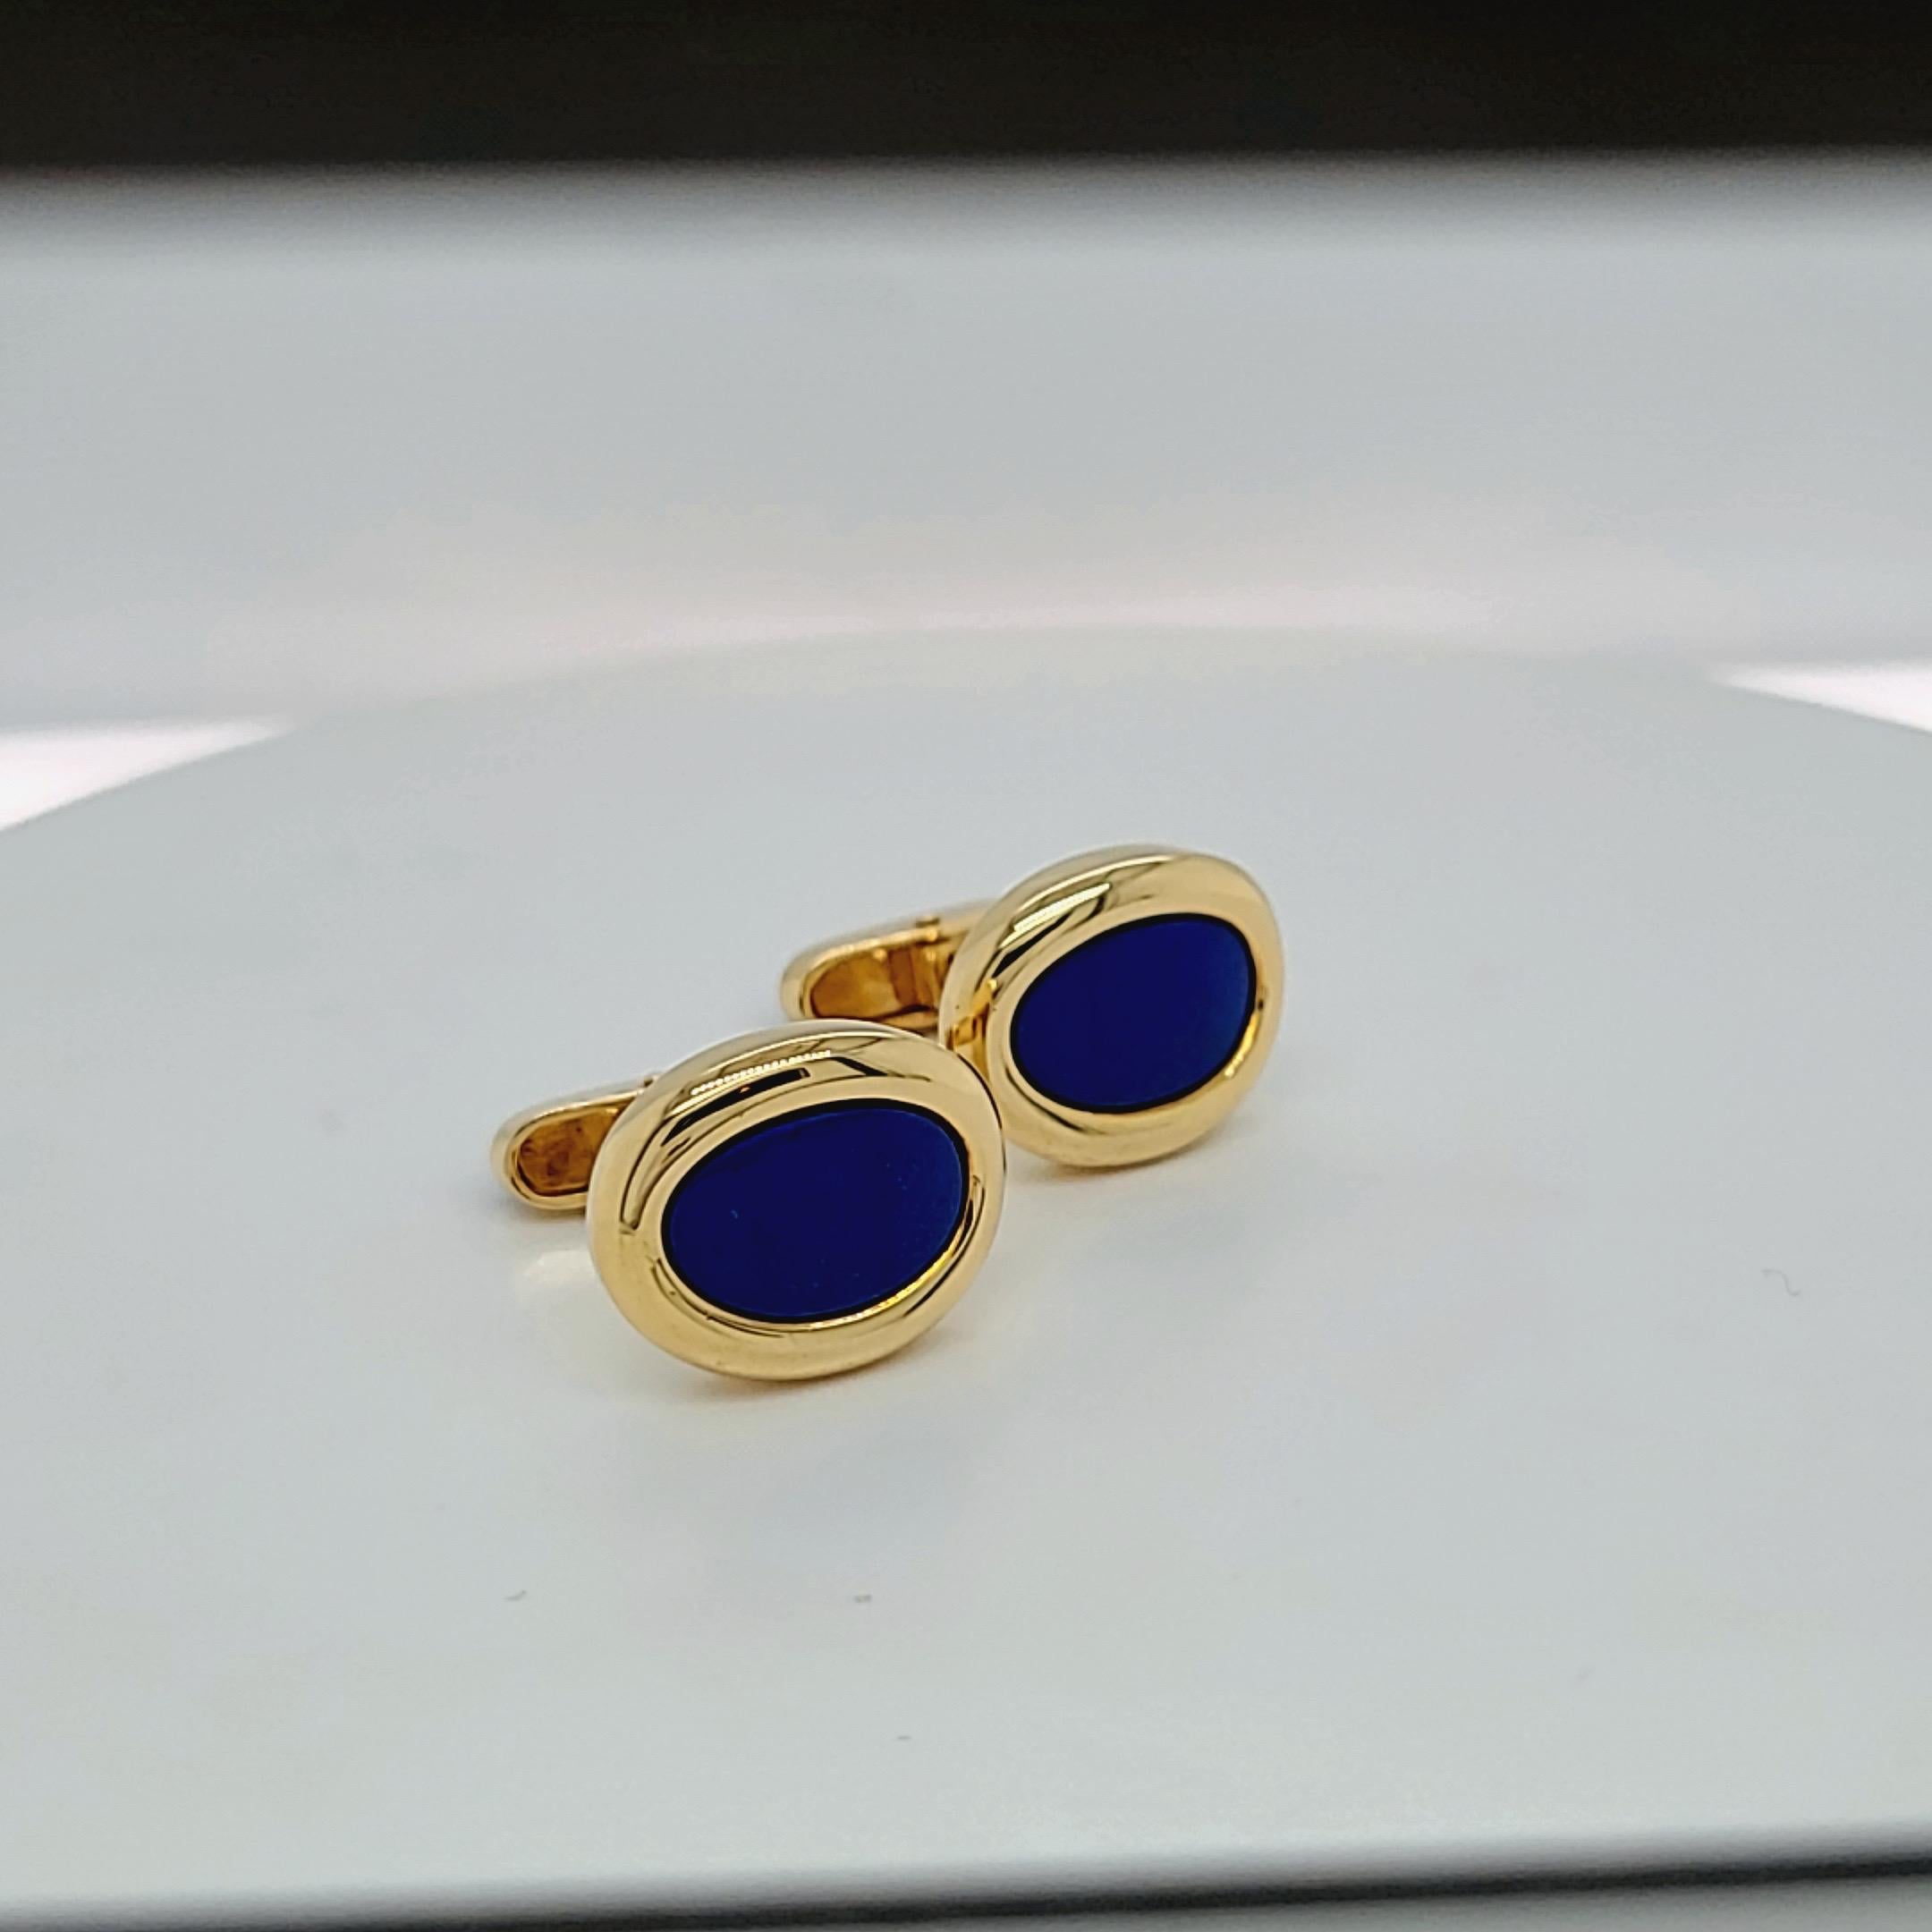 Classic and traditional ,these oval cuff links are timeless. The oval shaped cuff links with Lapis and Black Onyx centers are set in polished 18 karat. yellow gold. The blue and black colors of the stones make these cuff links extremely wearable.